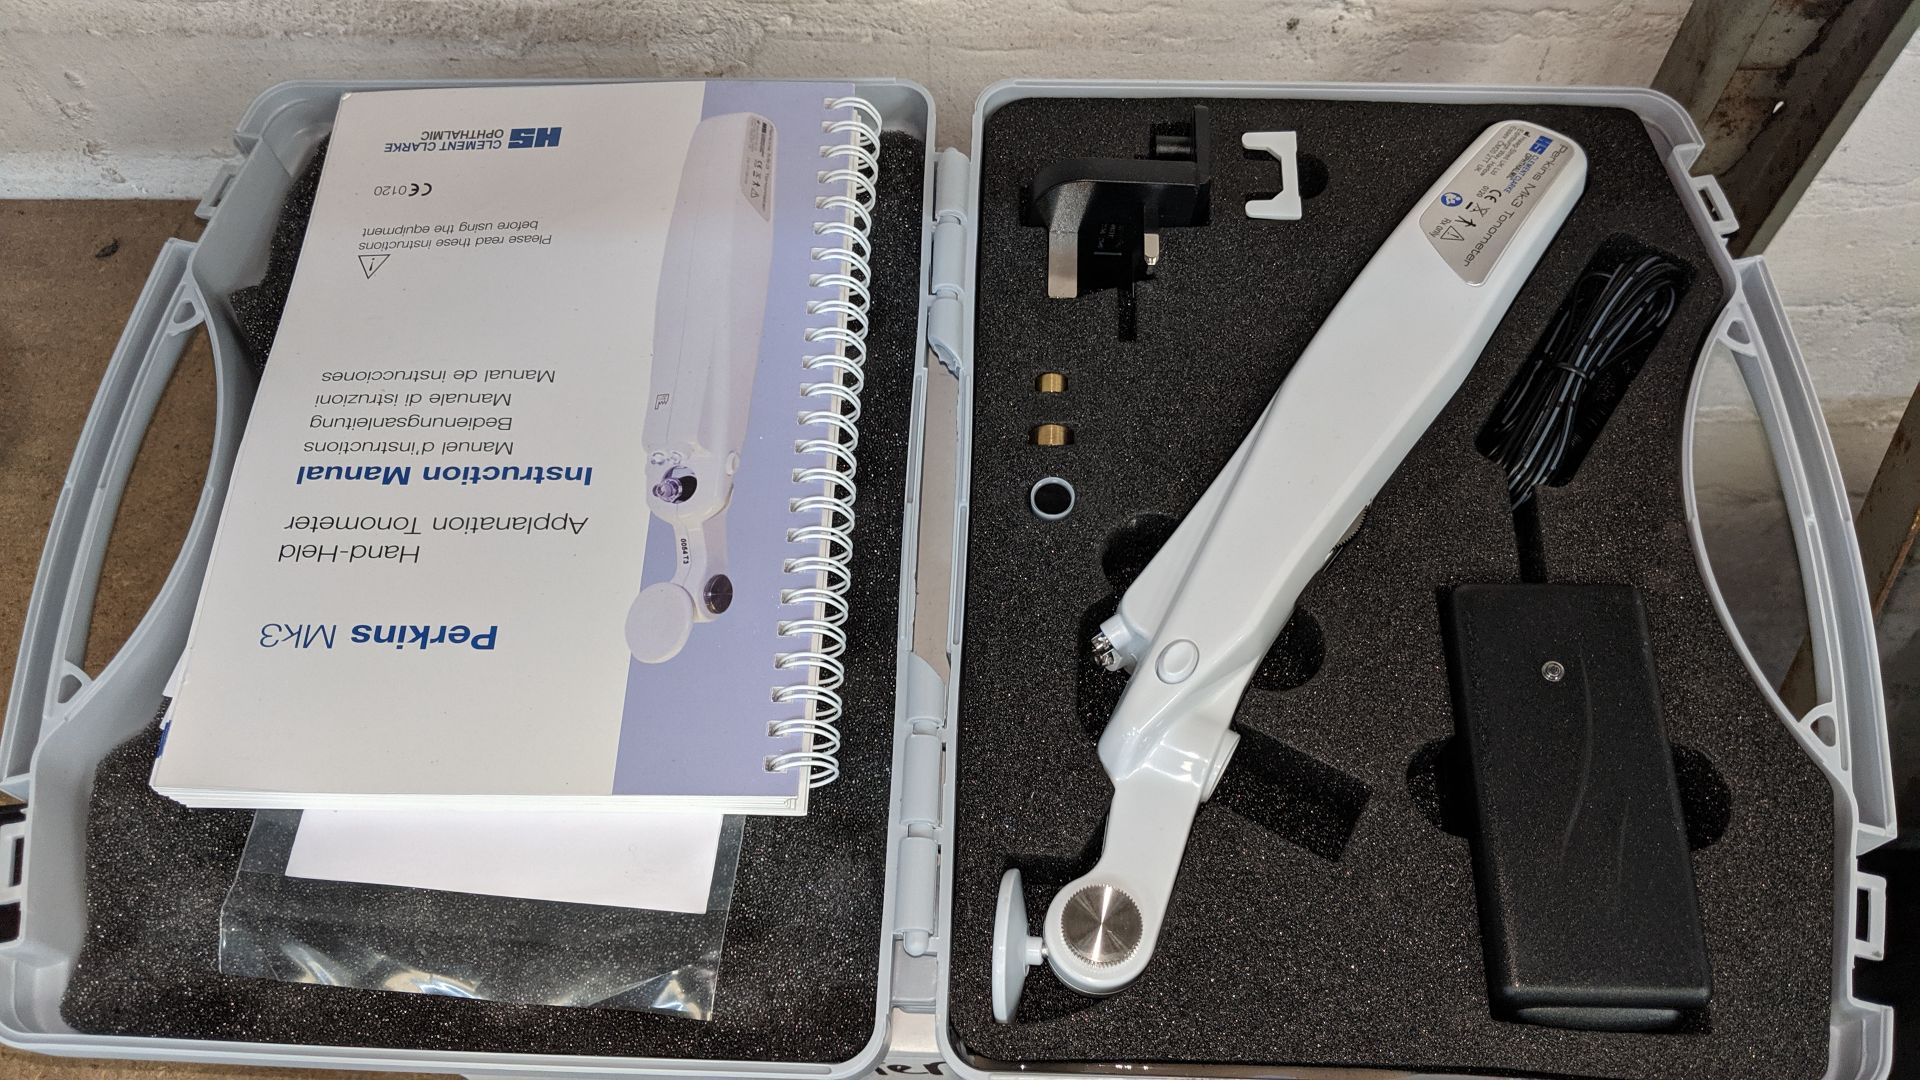 Perkins Mark 3 hand-held applanation tonometer in case including box All the lots in this auction - Image 4 of 4